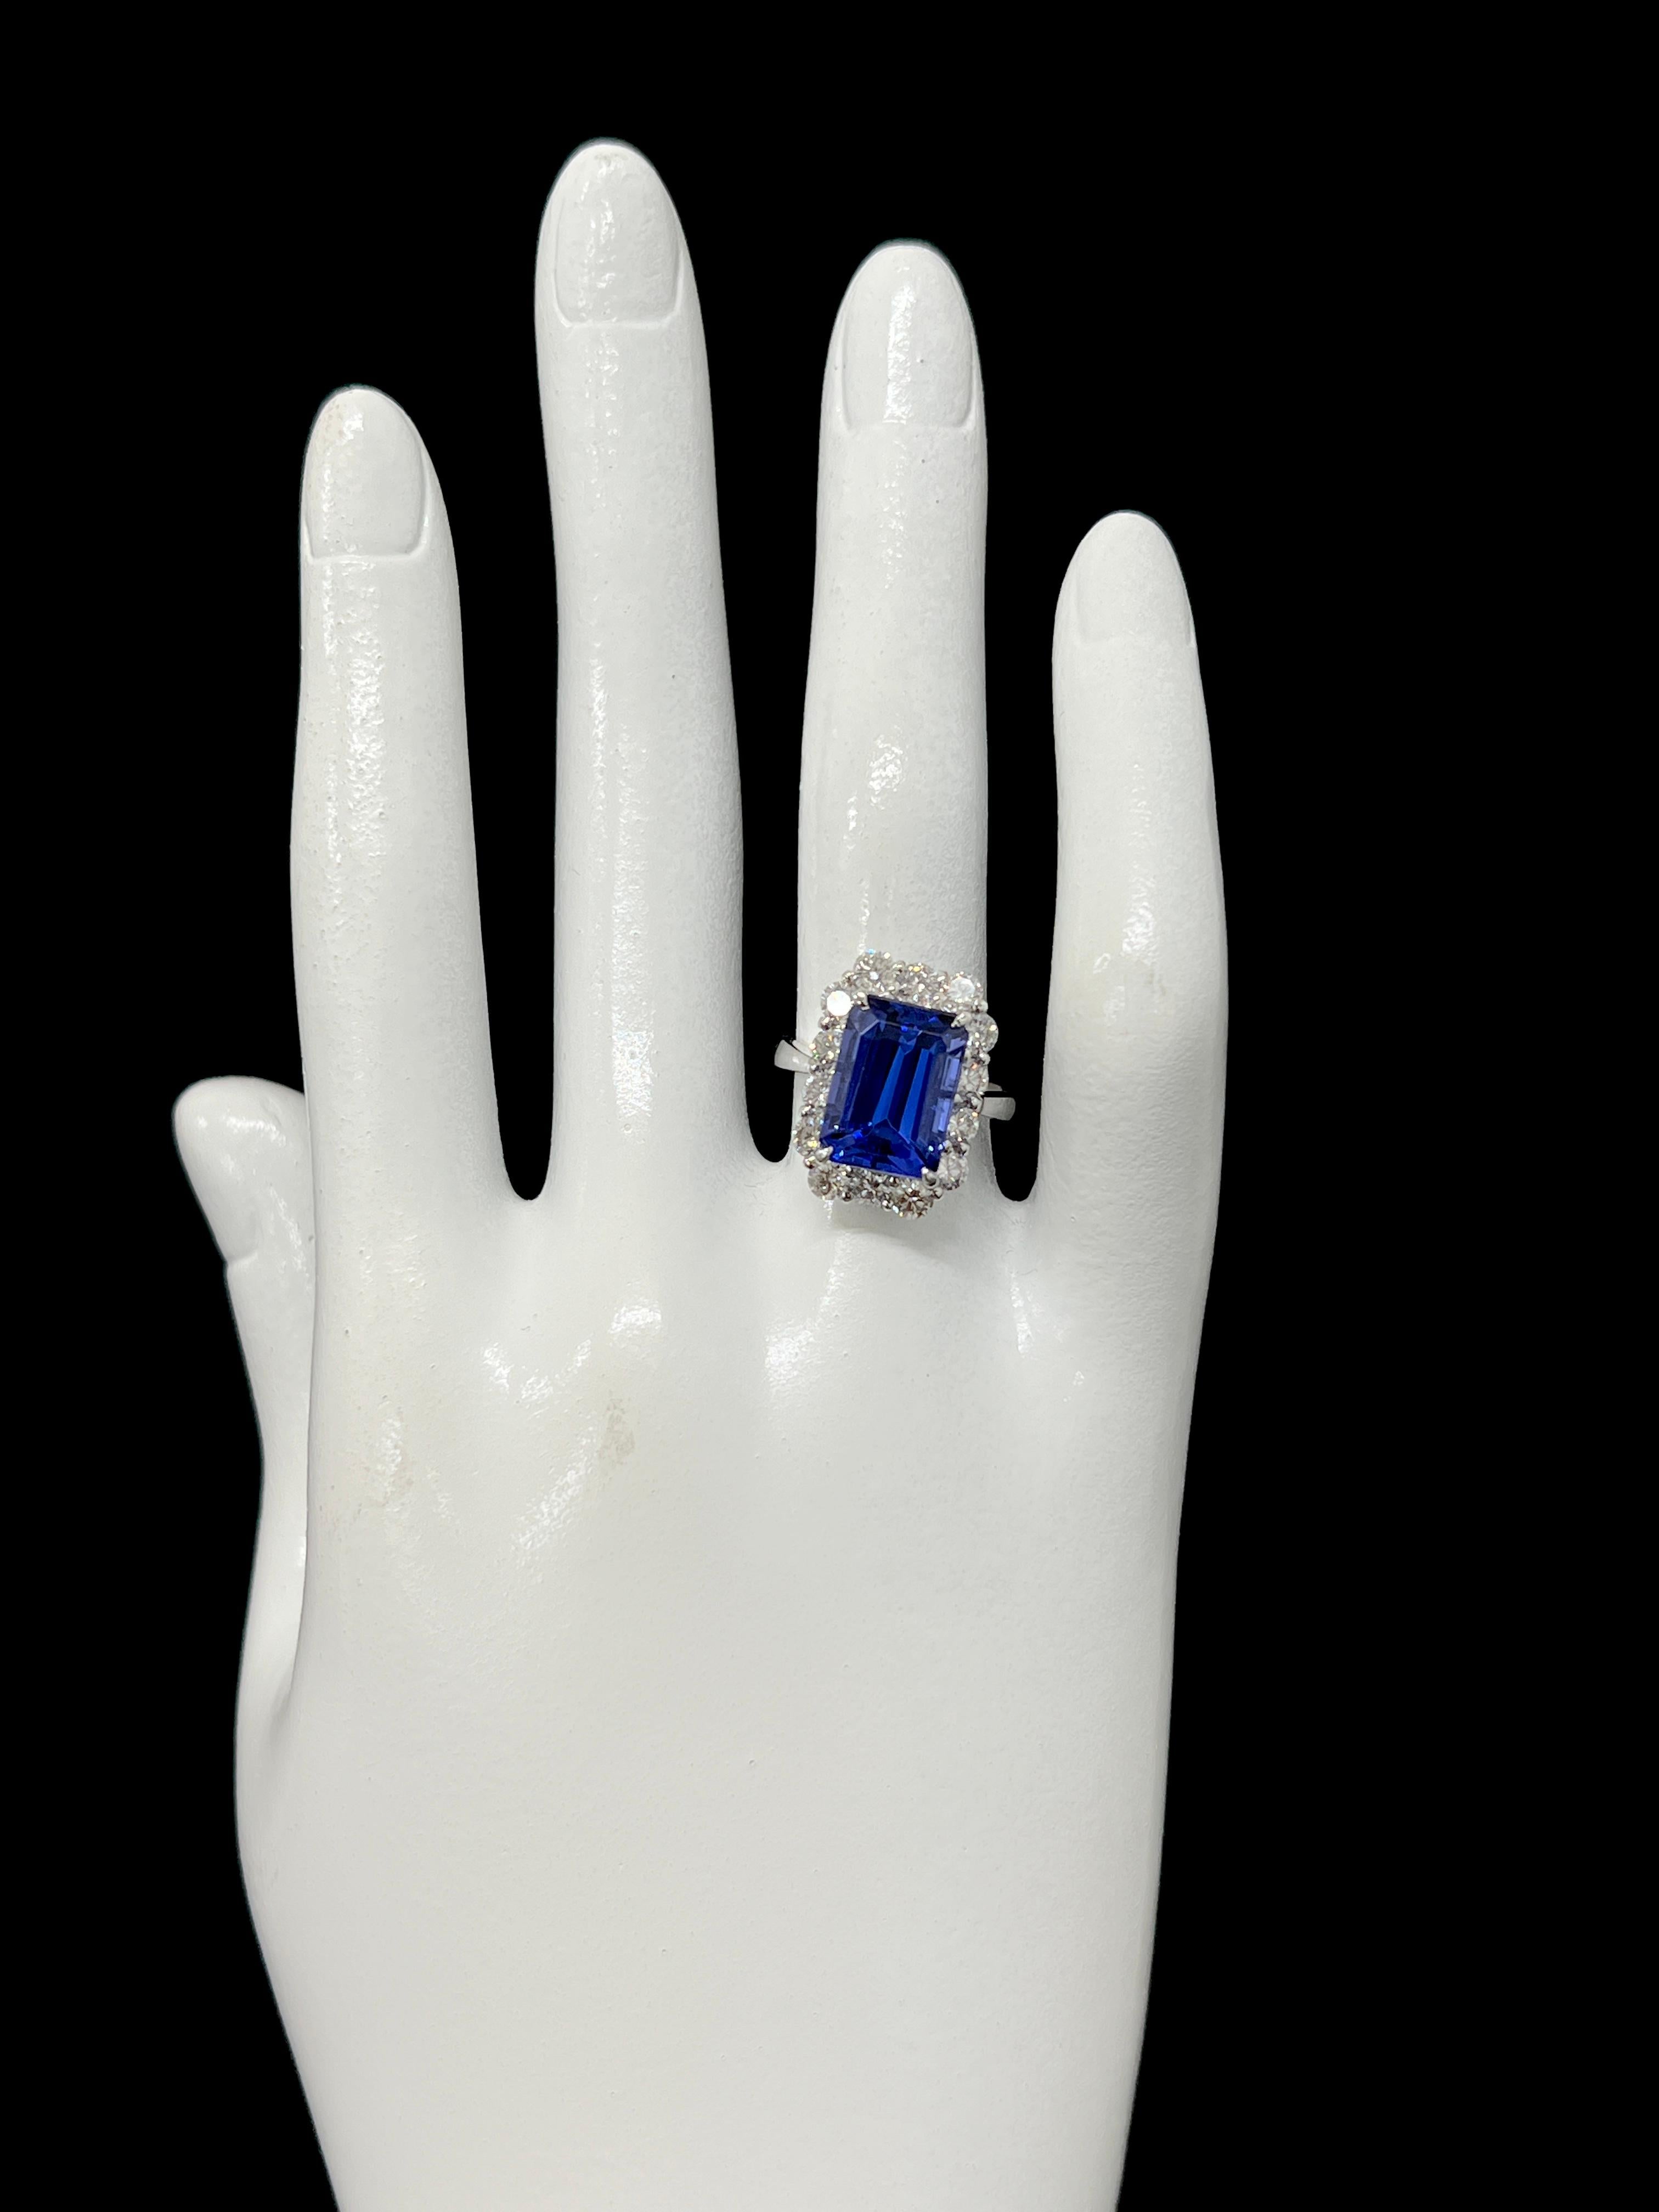 5.58 Carat Natural Octogon Tanzanite and Diamond Cocktail Ring Set in Platinum For Sale 1